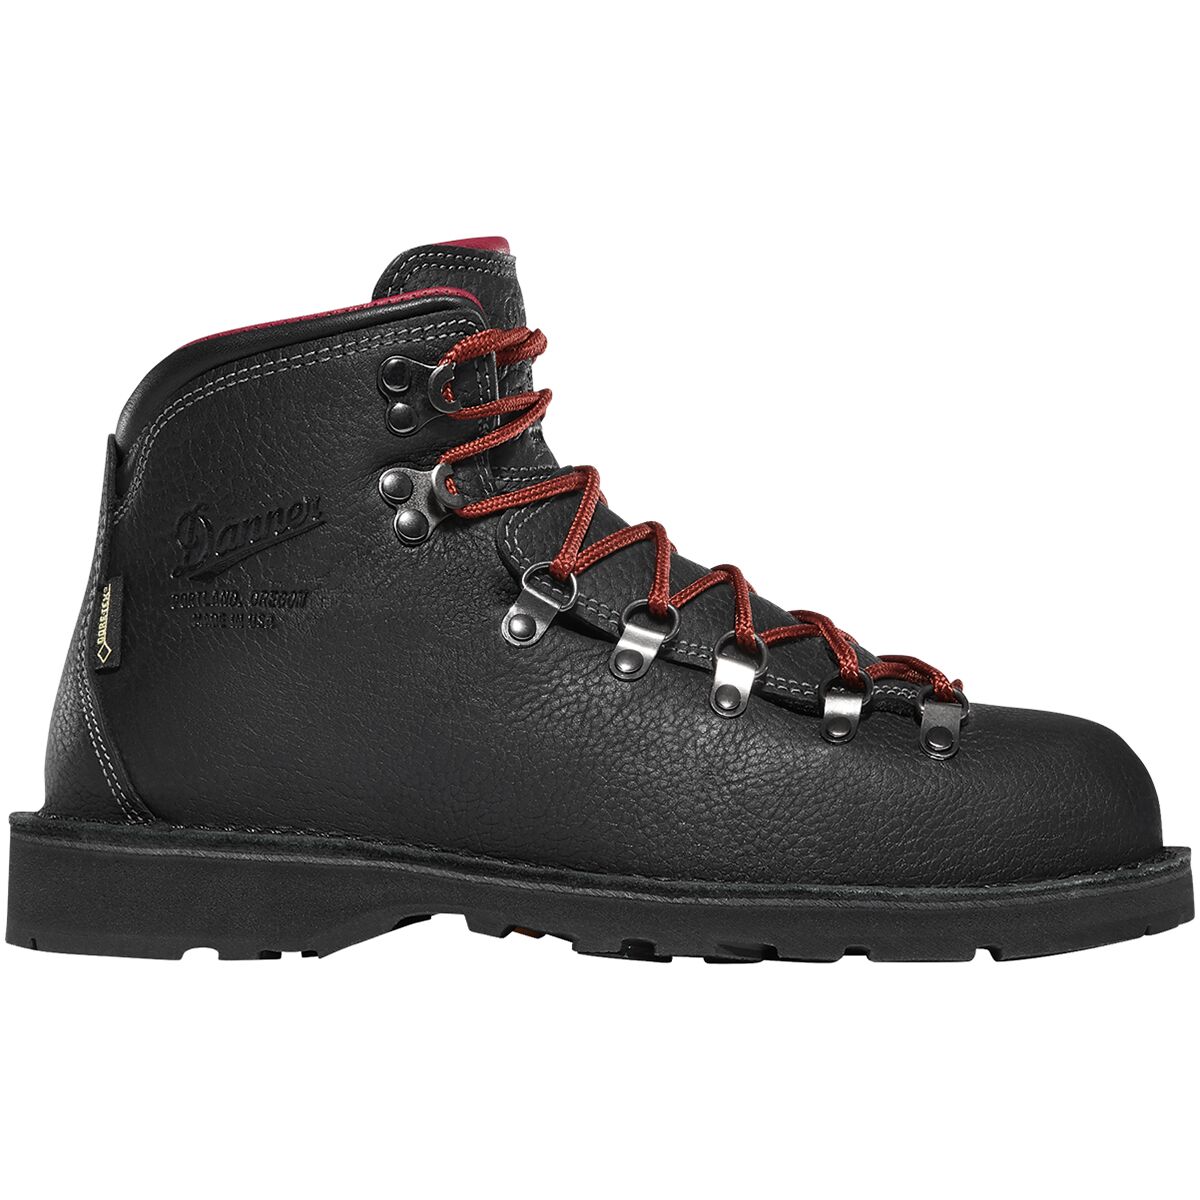 Portland Select Mountain Pass Insulated Wide Boot - Men